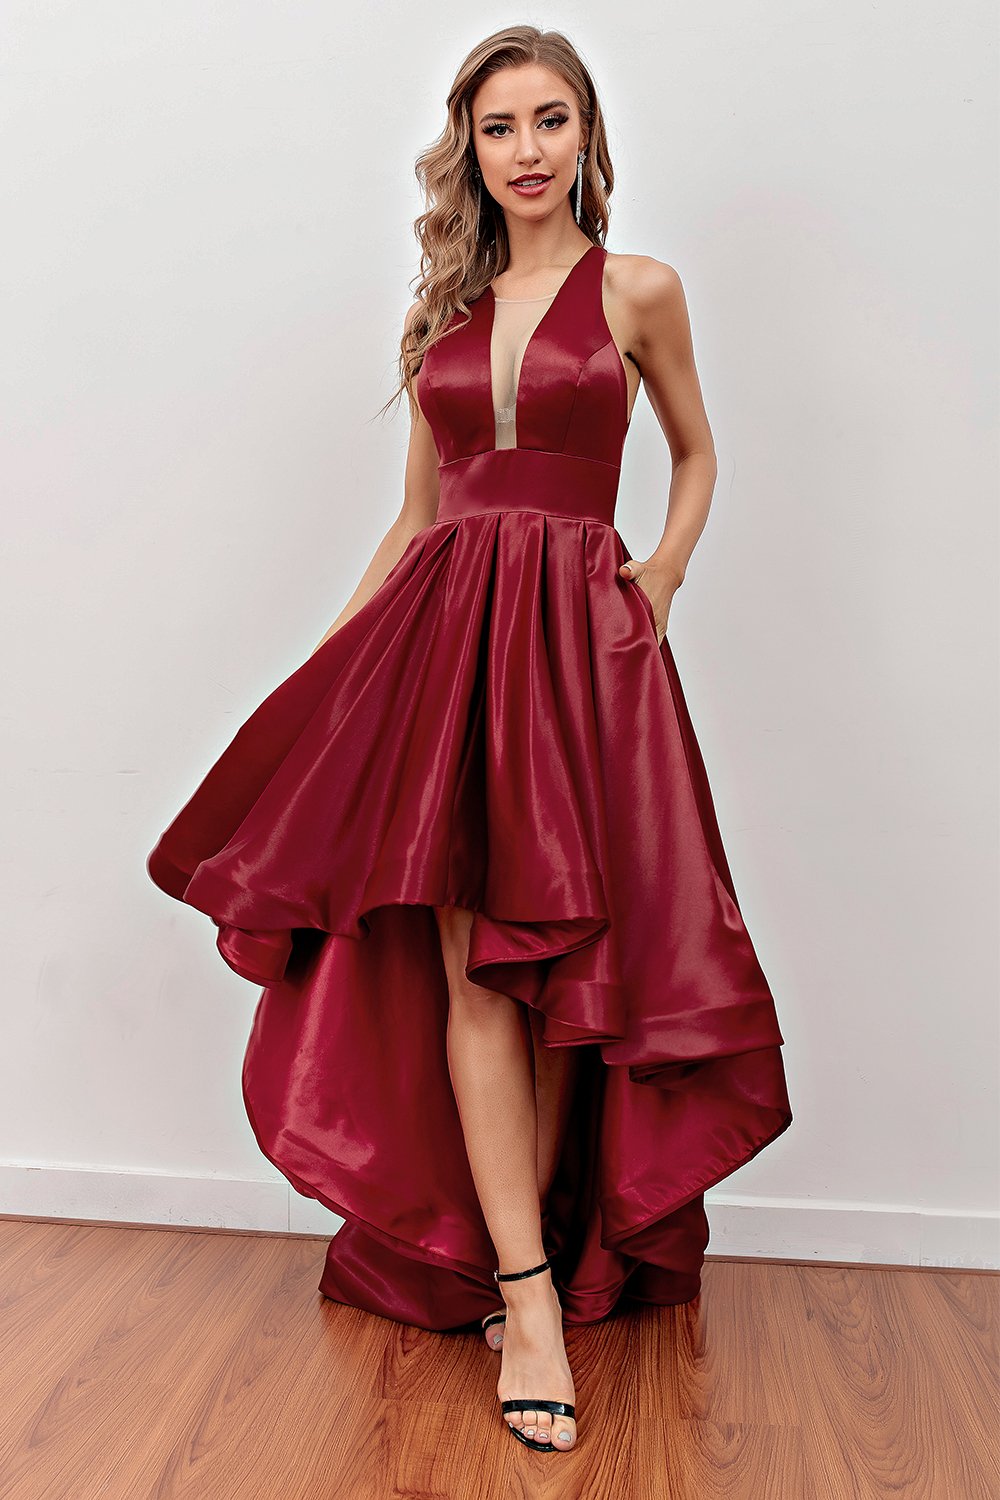 Burgundy High Low Formal Dress with Pockets